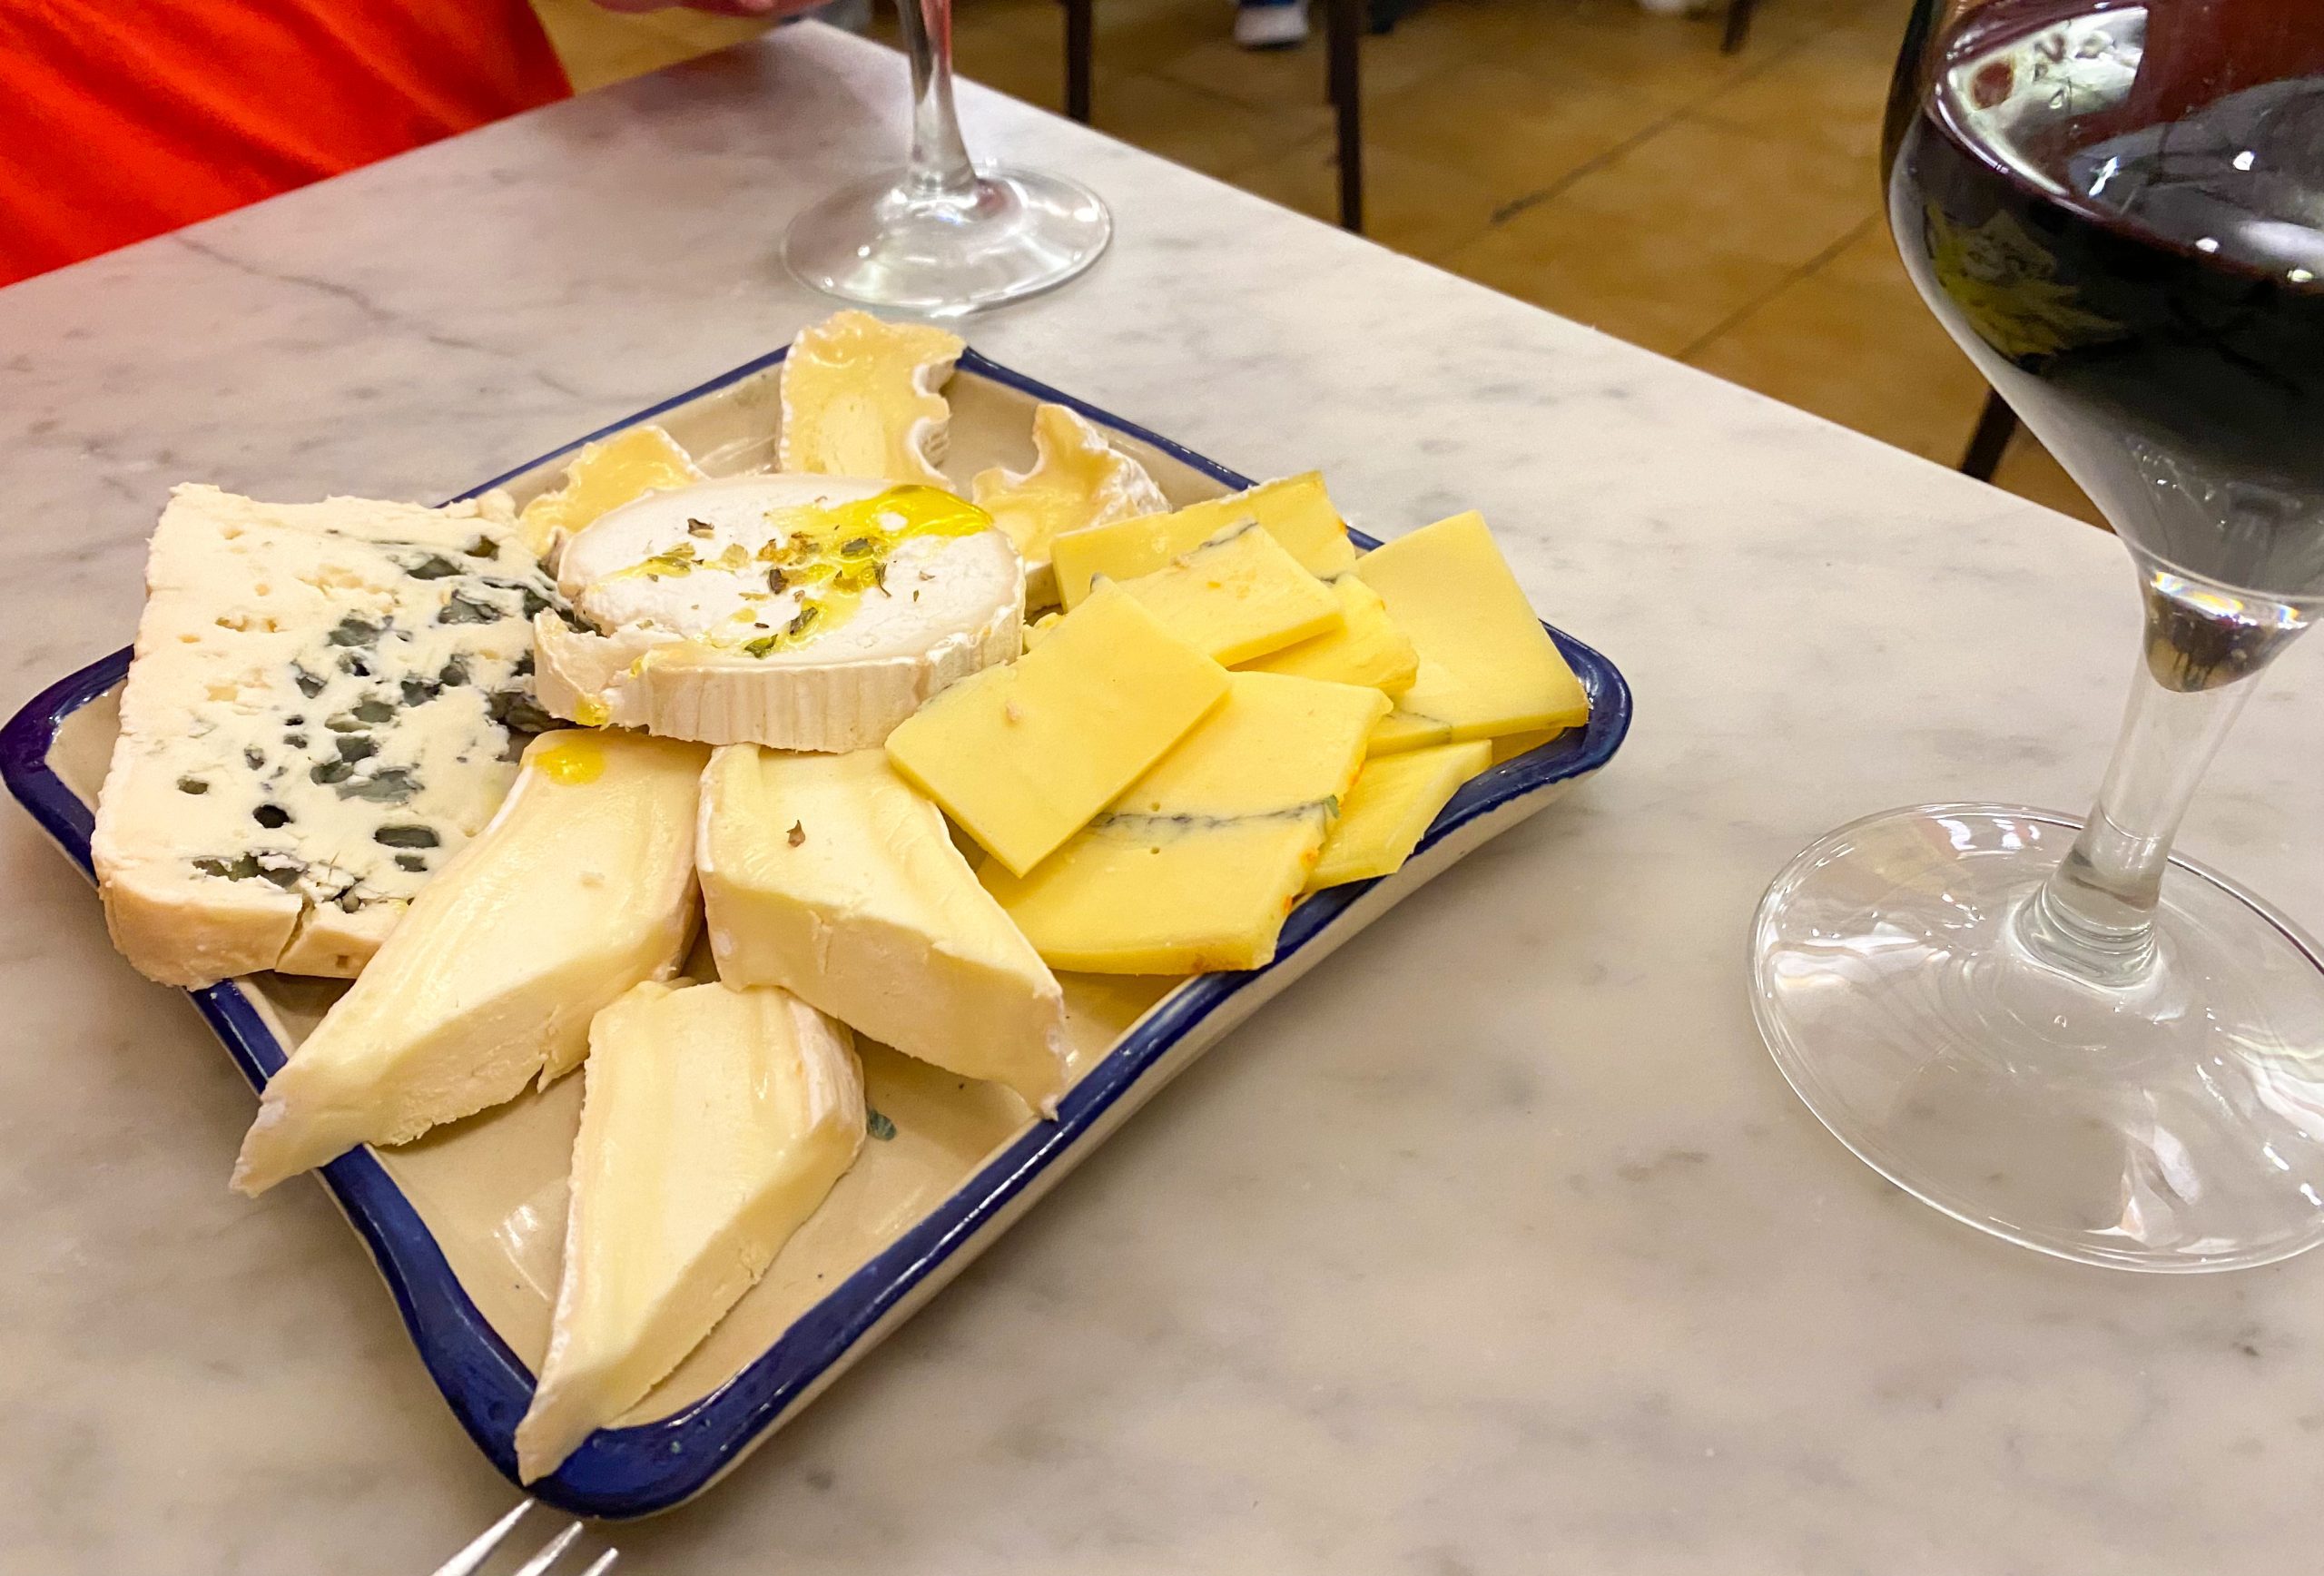 A plate of assorted slices of cheese on a marble table with two glasses of red wine.